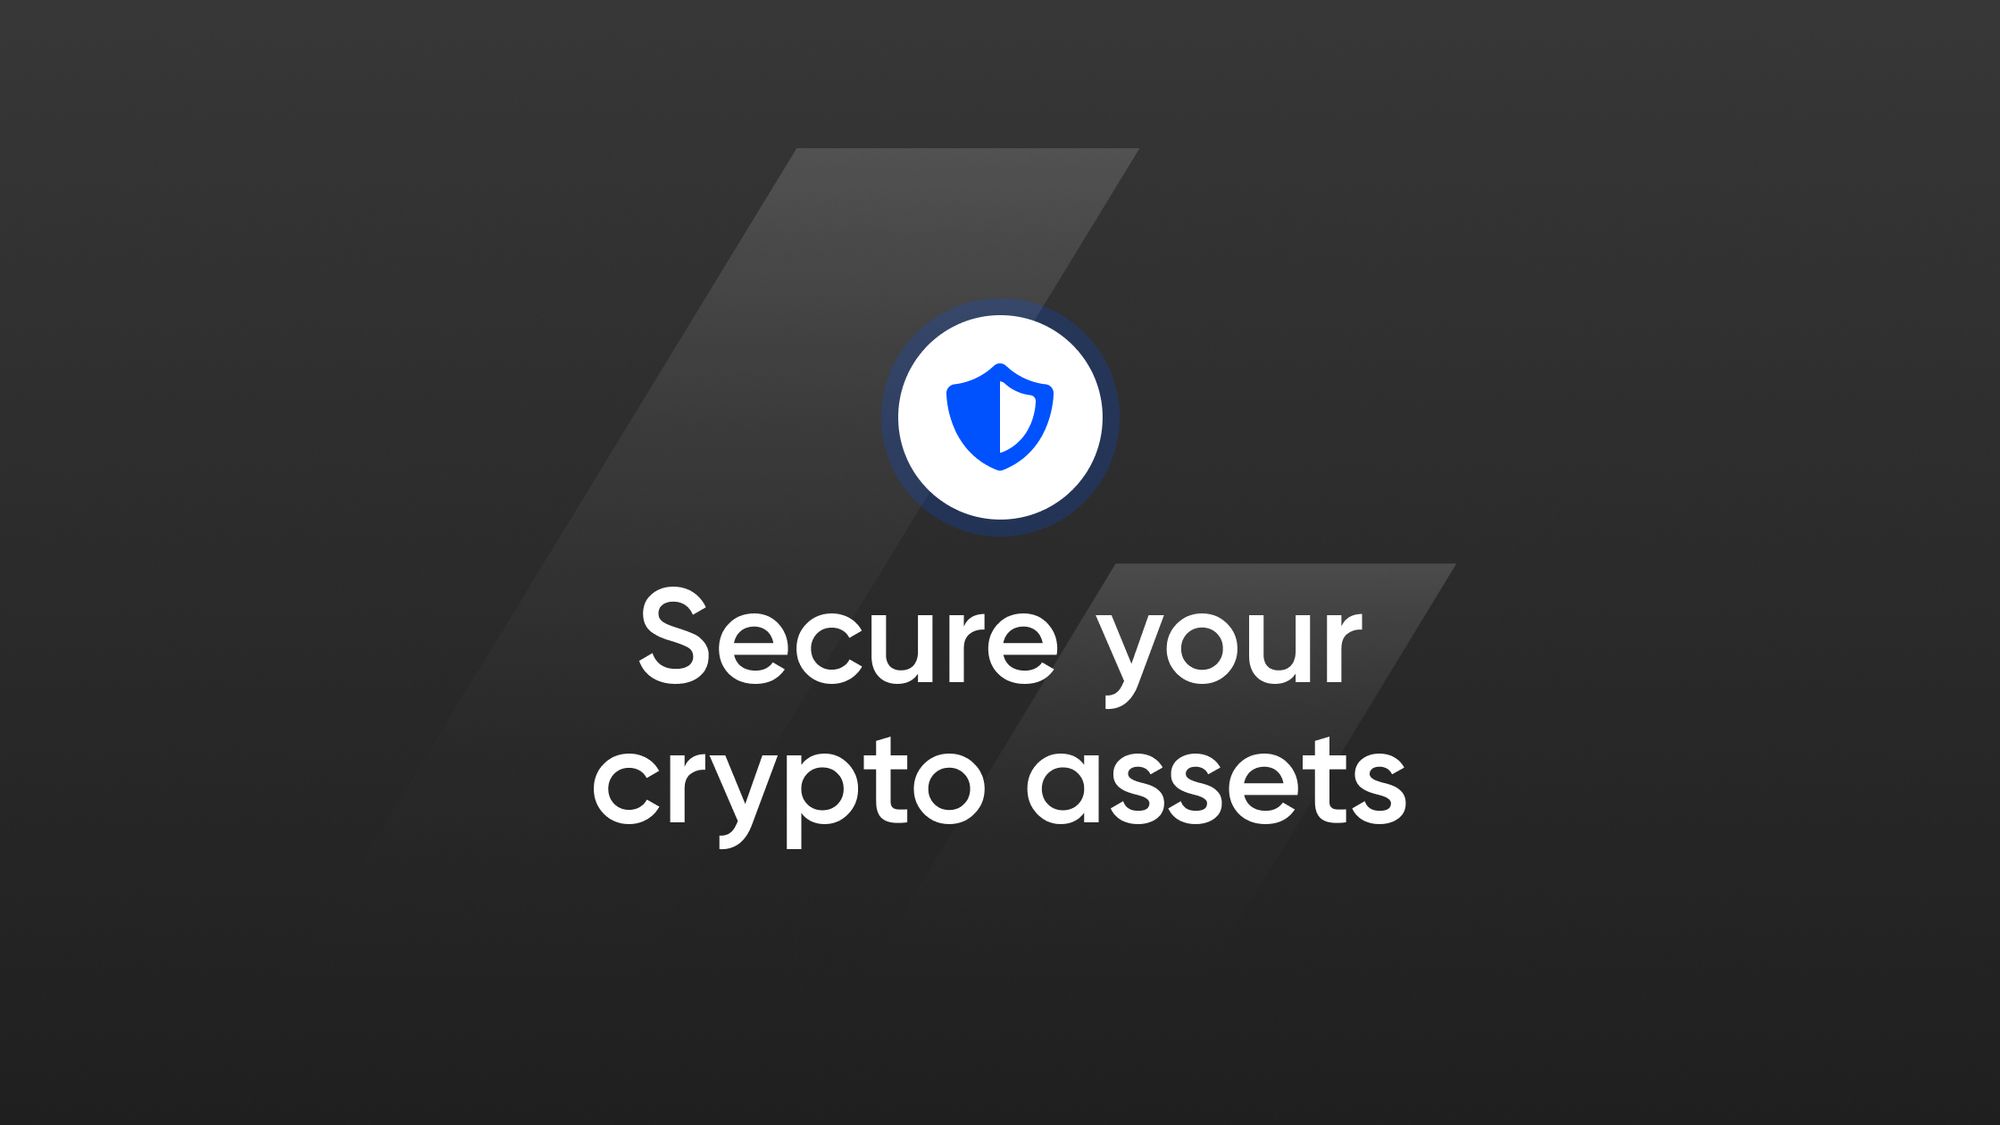 Your guide to safe crypto trading
